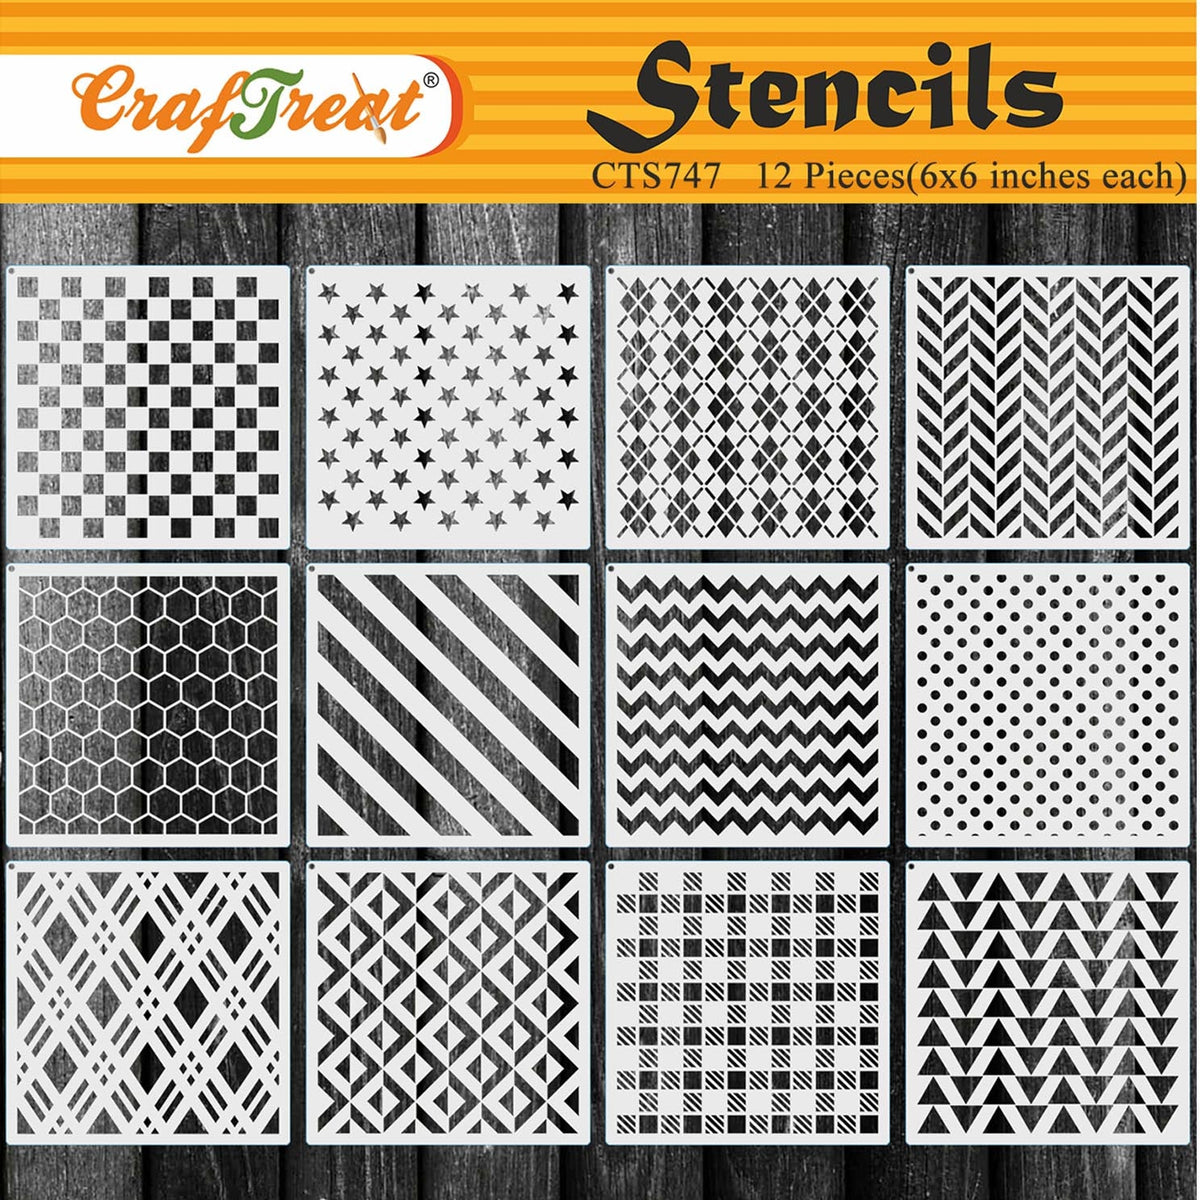 Purartly 30-Pack Geometric Stencils 6 x 6 Inch Painting Templates